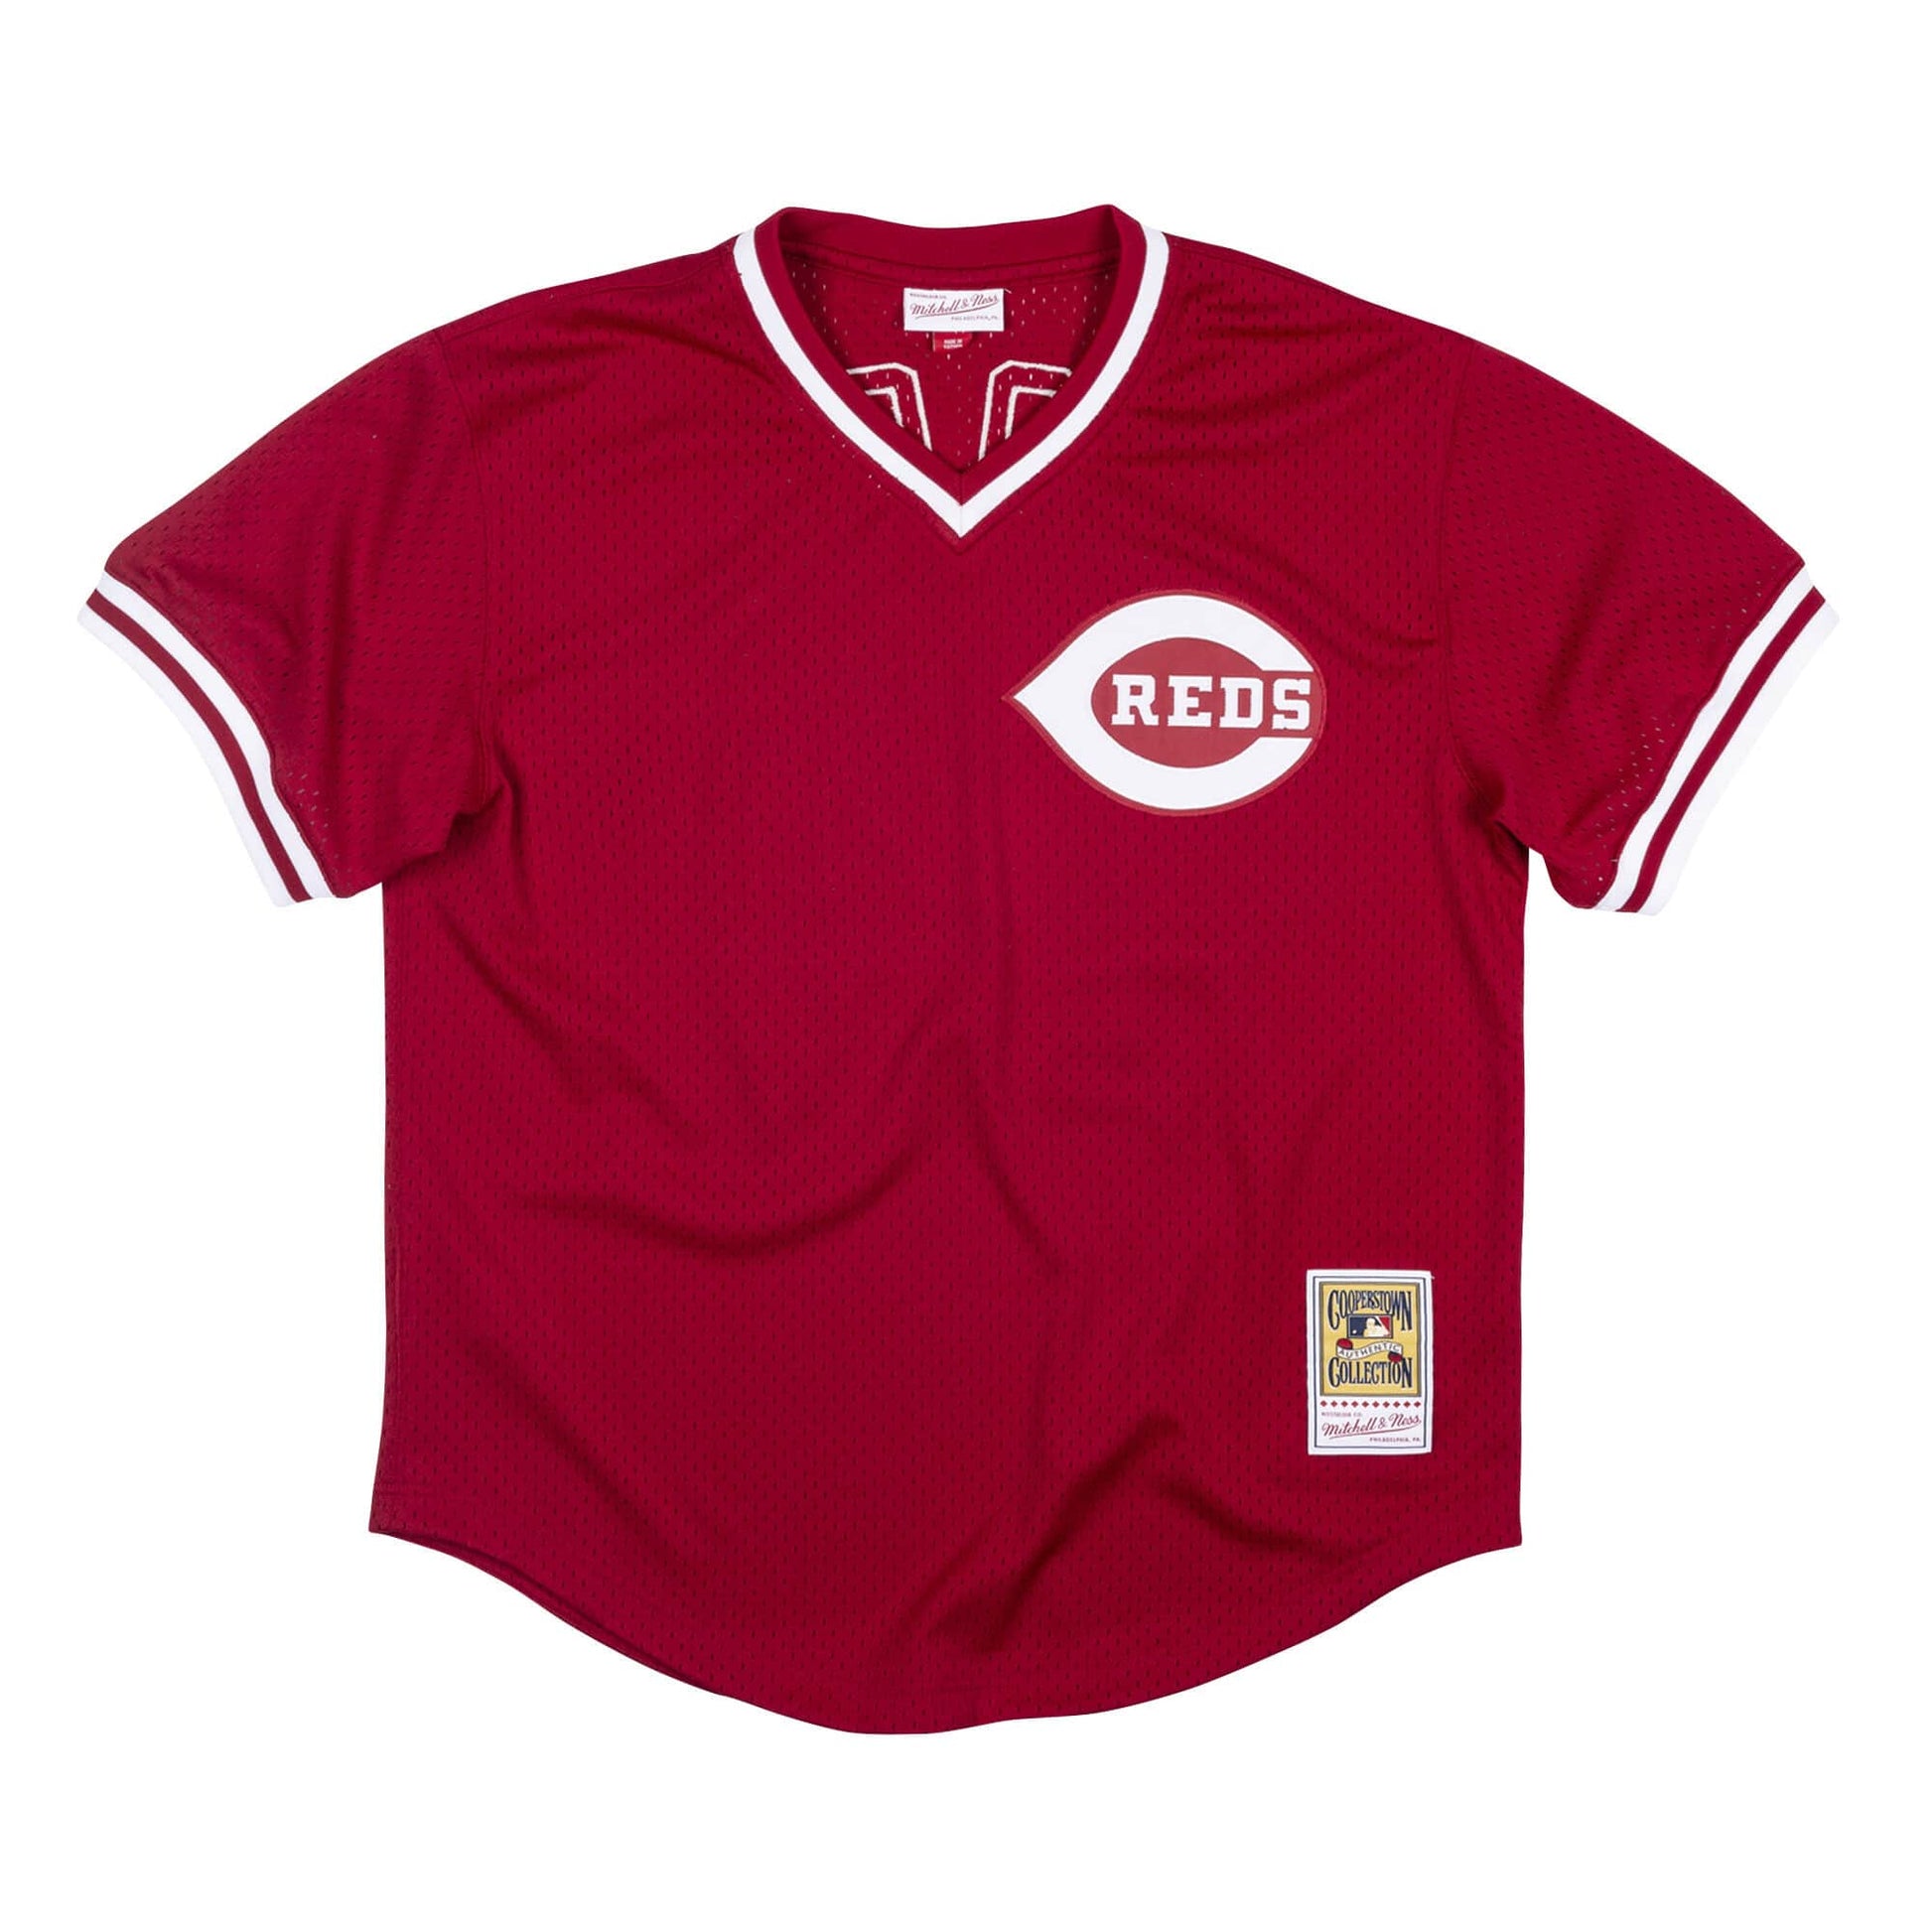 Pete Rose Jersey, Pete Rose Gear and Apparel